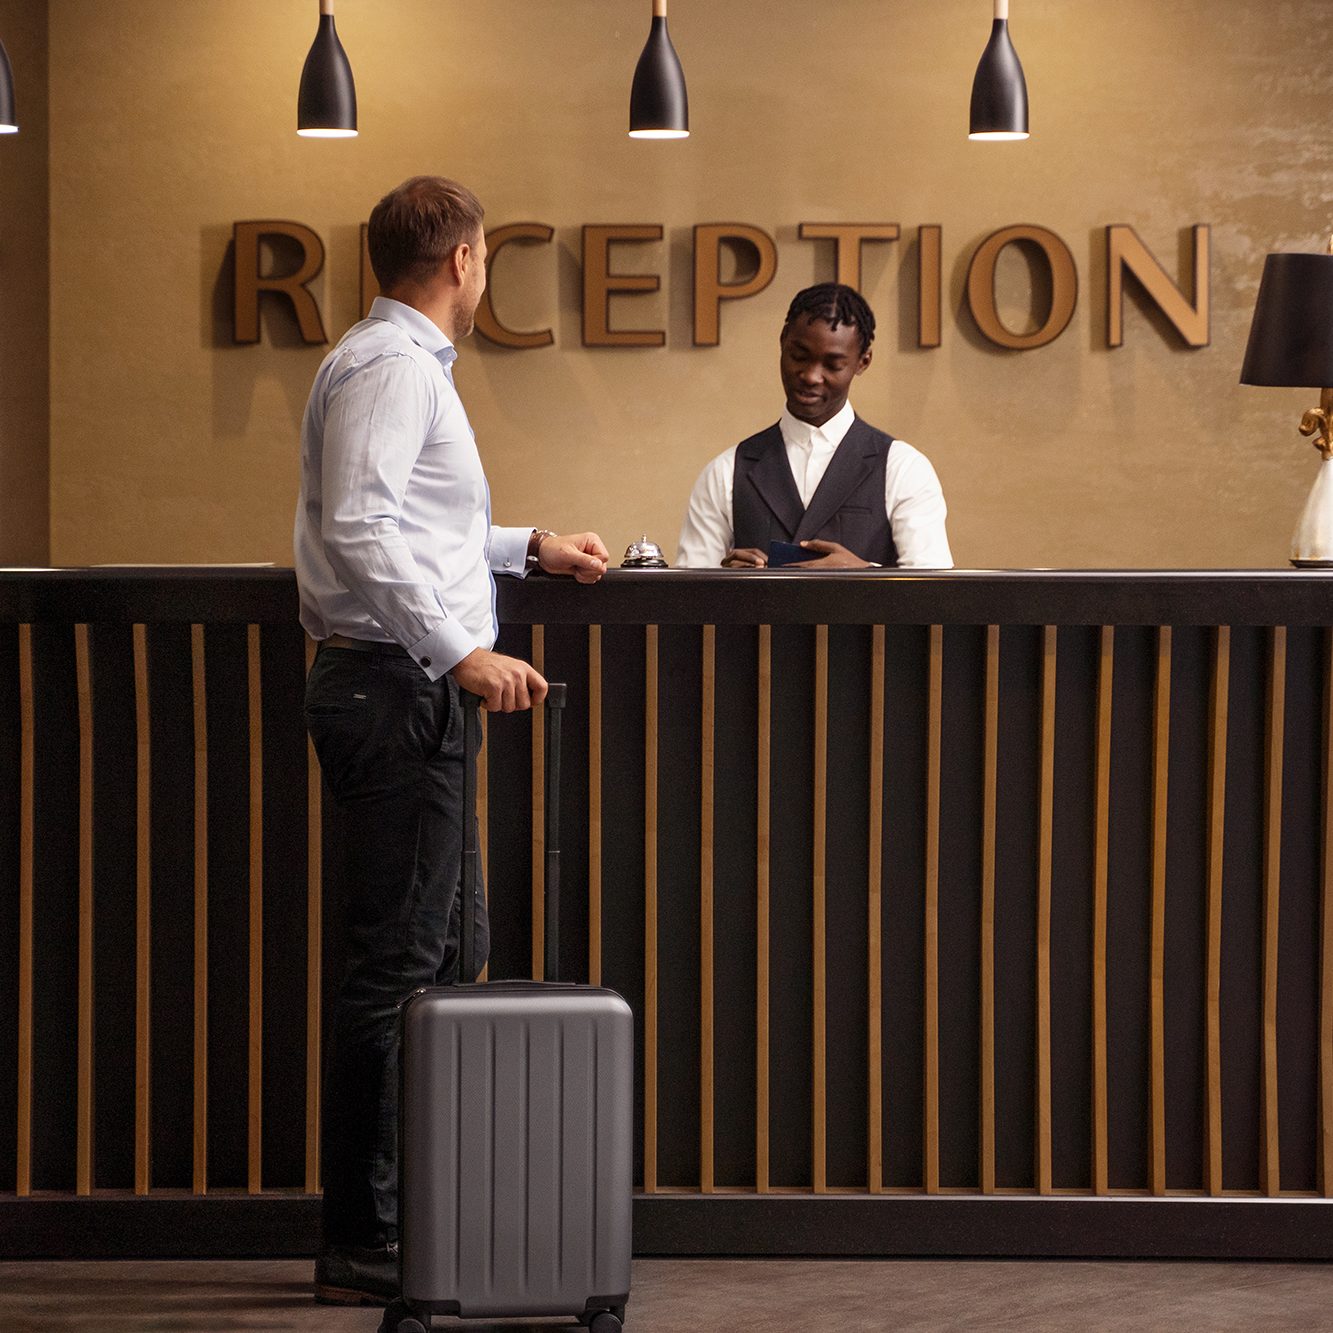 Man with suitcase checking in with man behind hotel reception desk